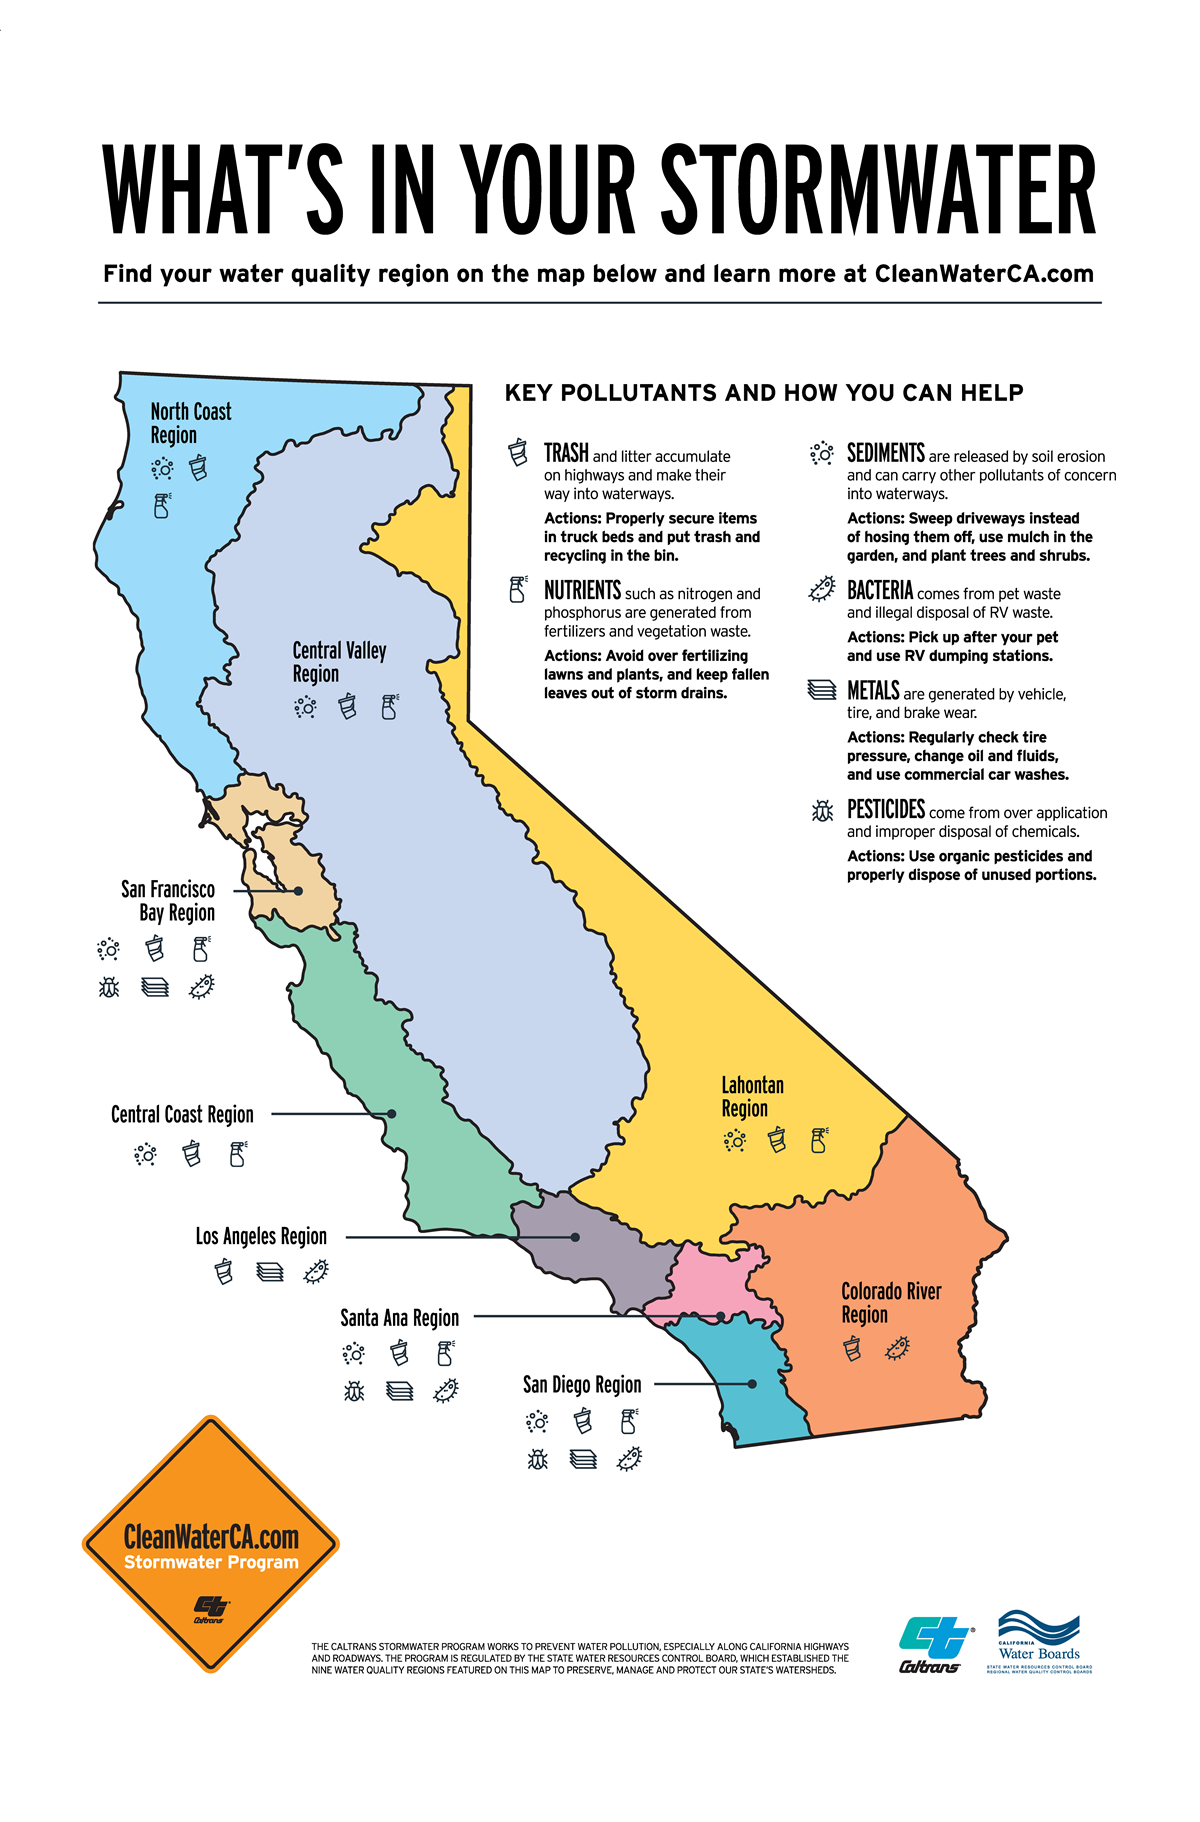 What's In Your Stormwater - infographic map of California showing types of stormwater pollution prevalent by region